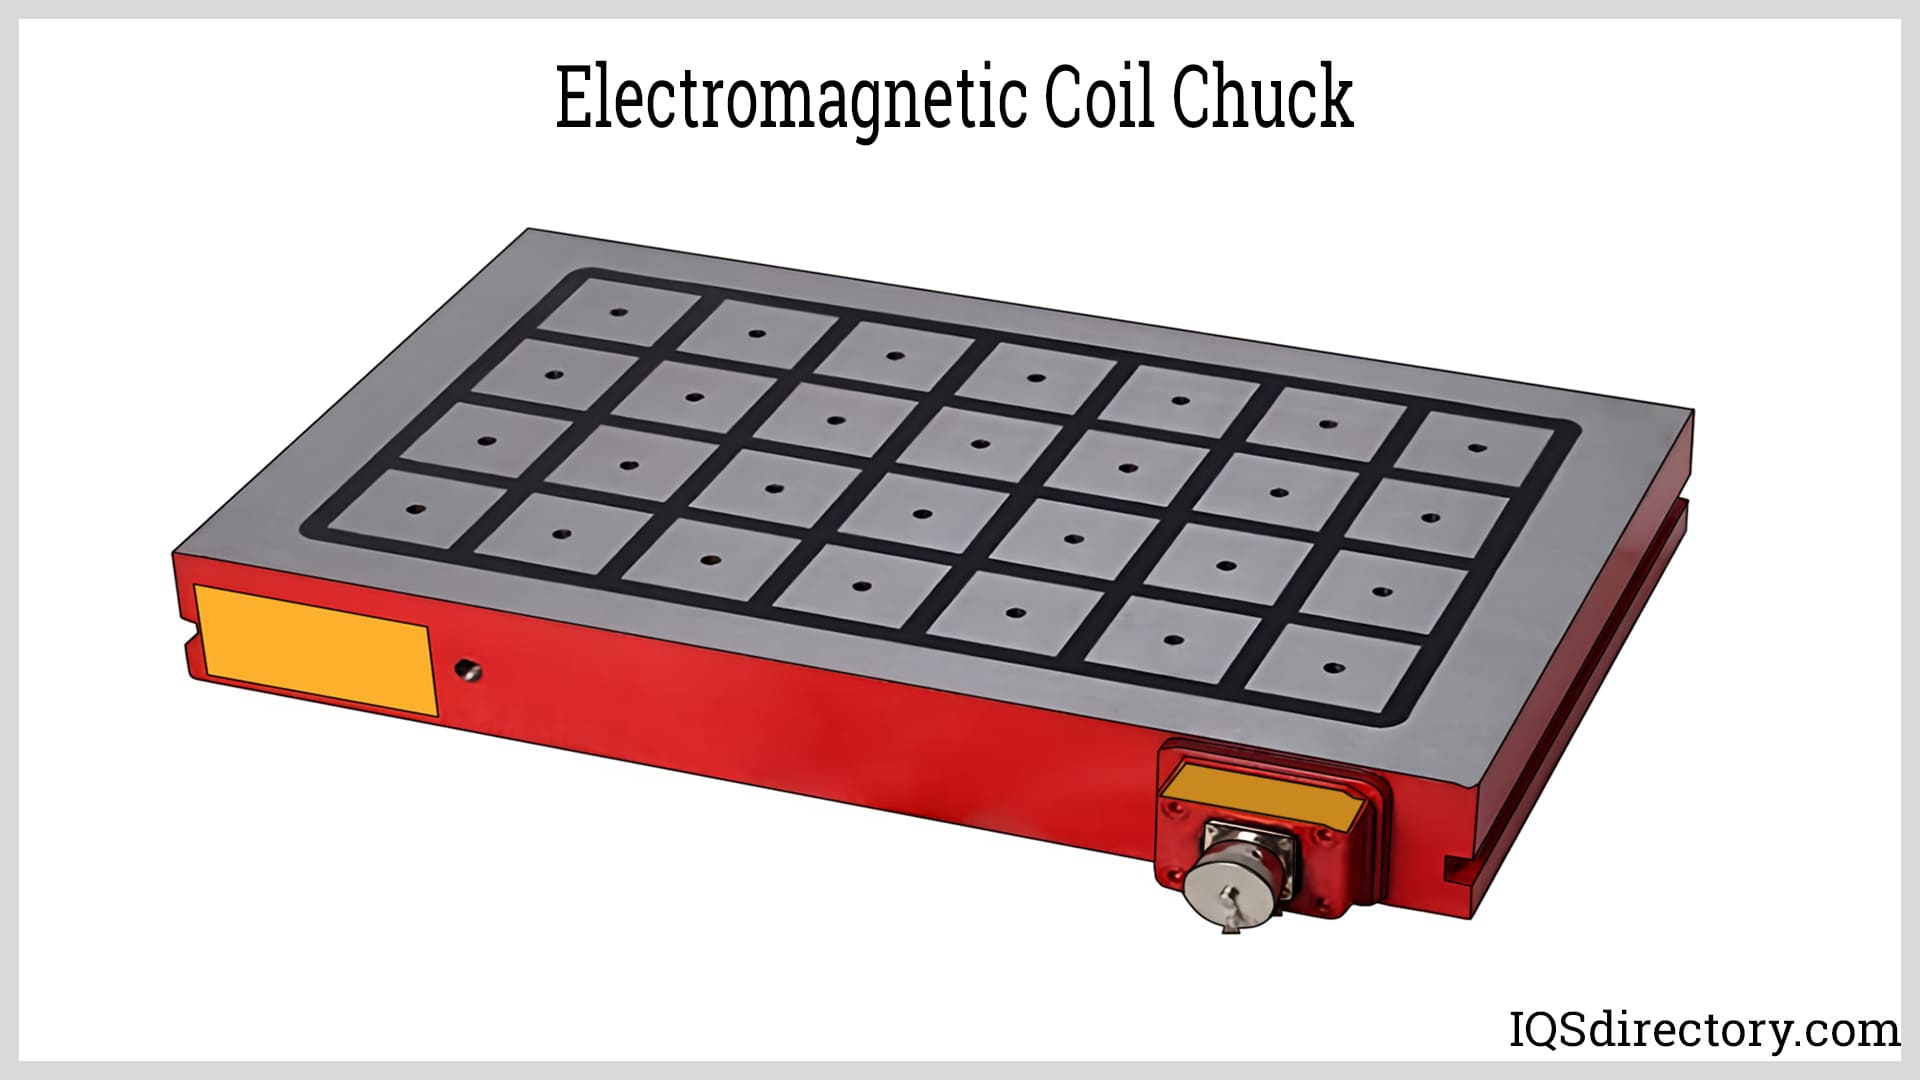 Electromagnetic Coil Chuck